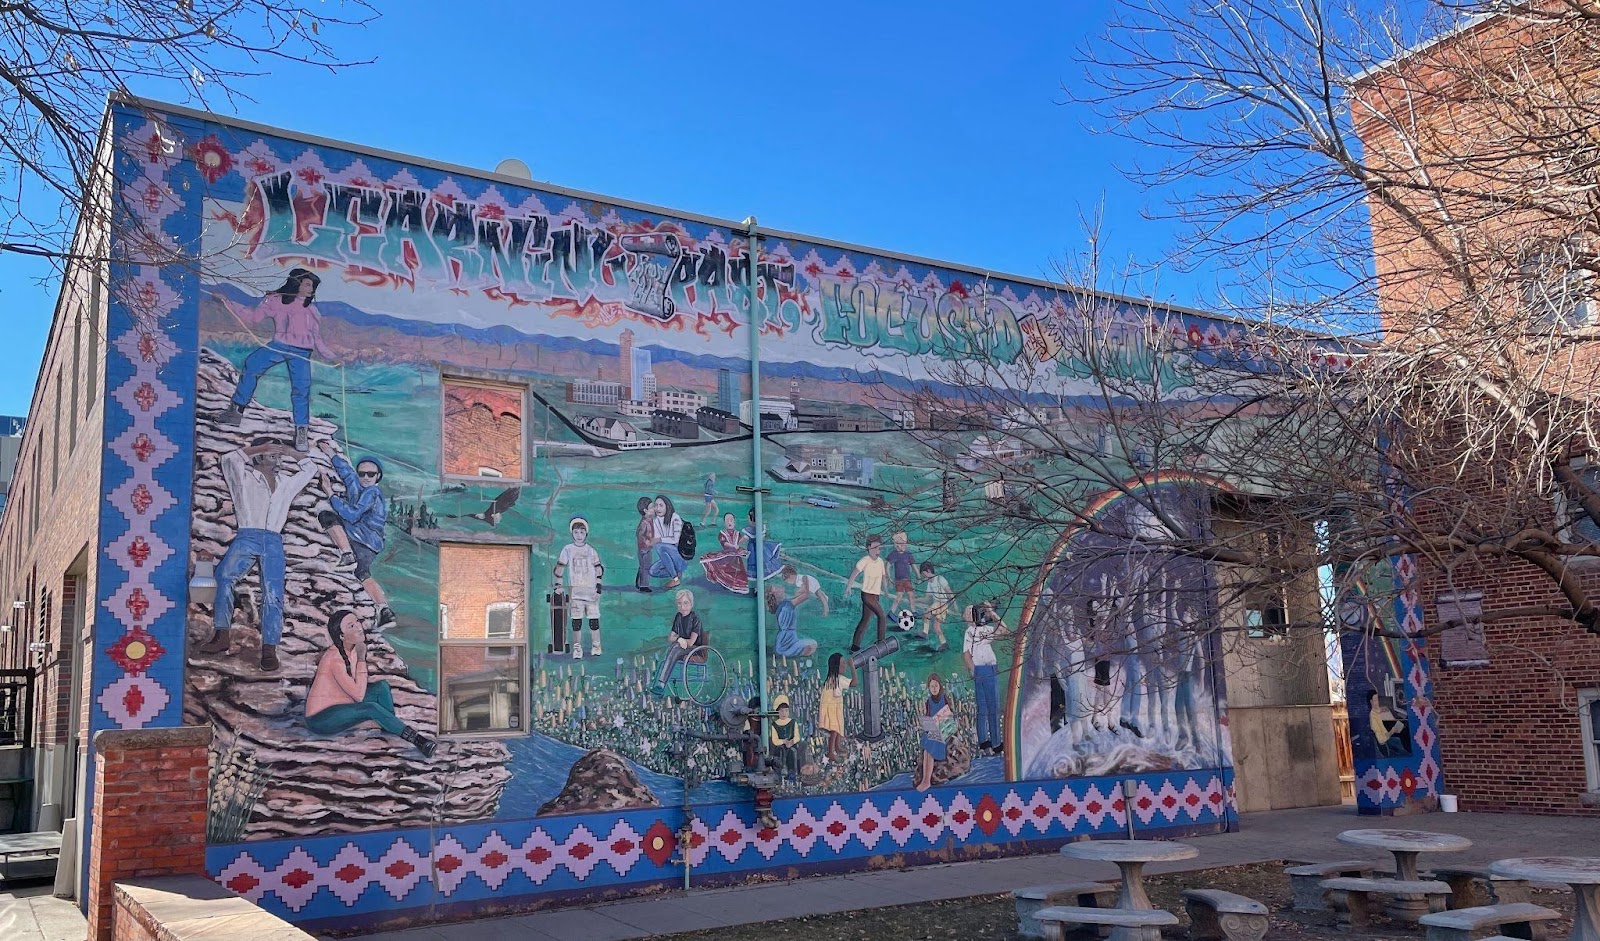 An image of the mural Learning from the Past, Focused on the Future, which depicts many Chicano individuals doing many different activities. The mural is painted on the side of a business building.